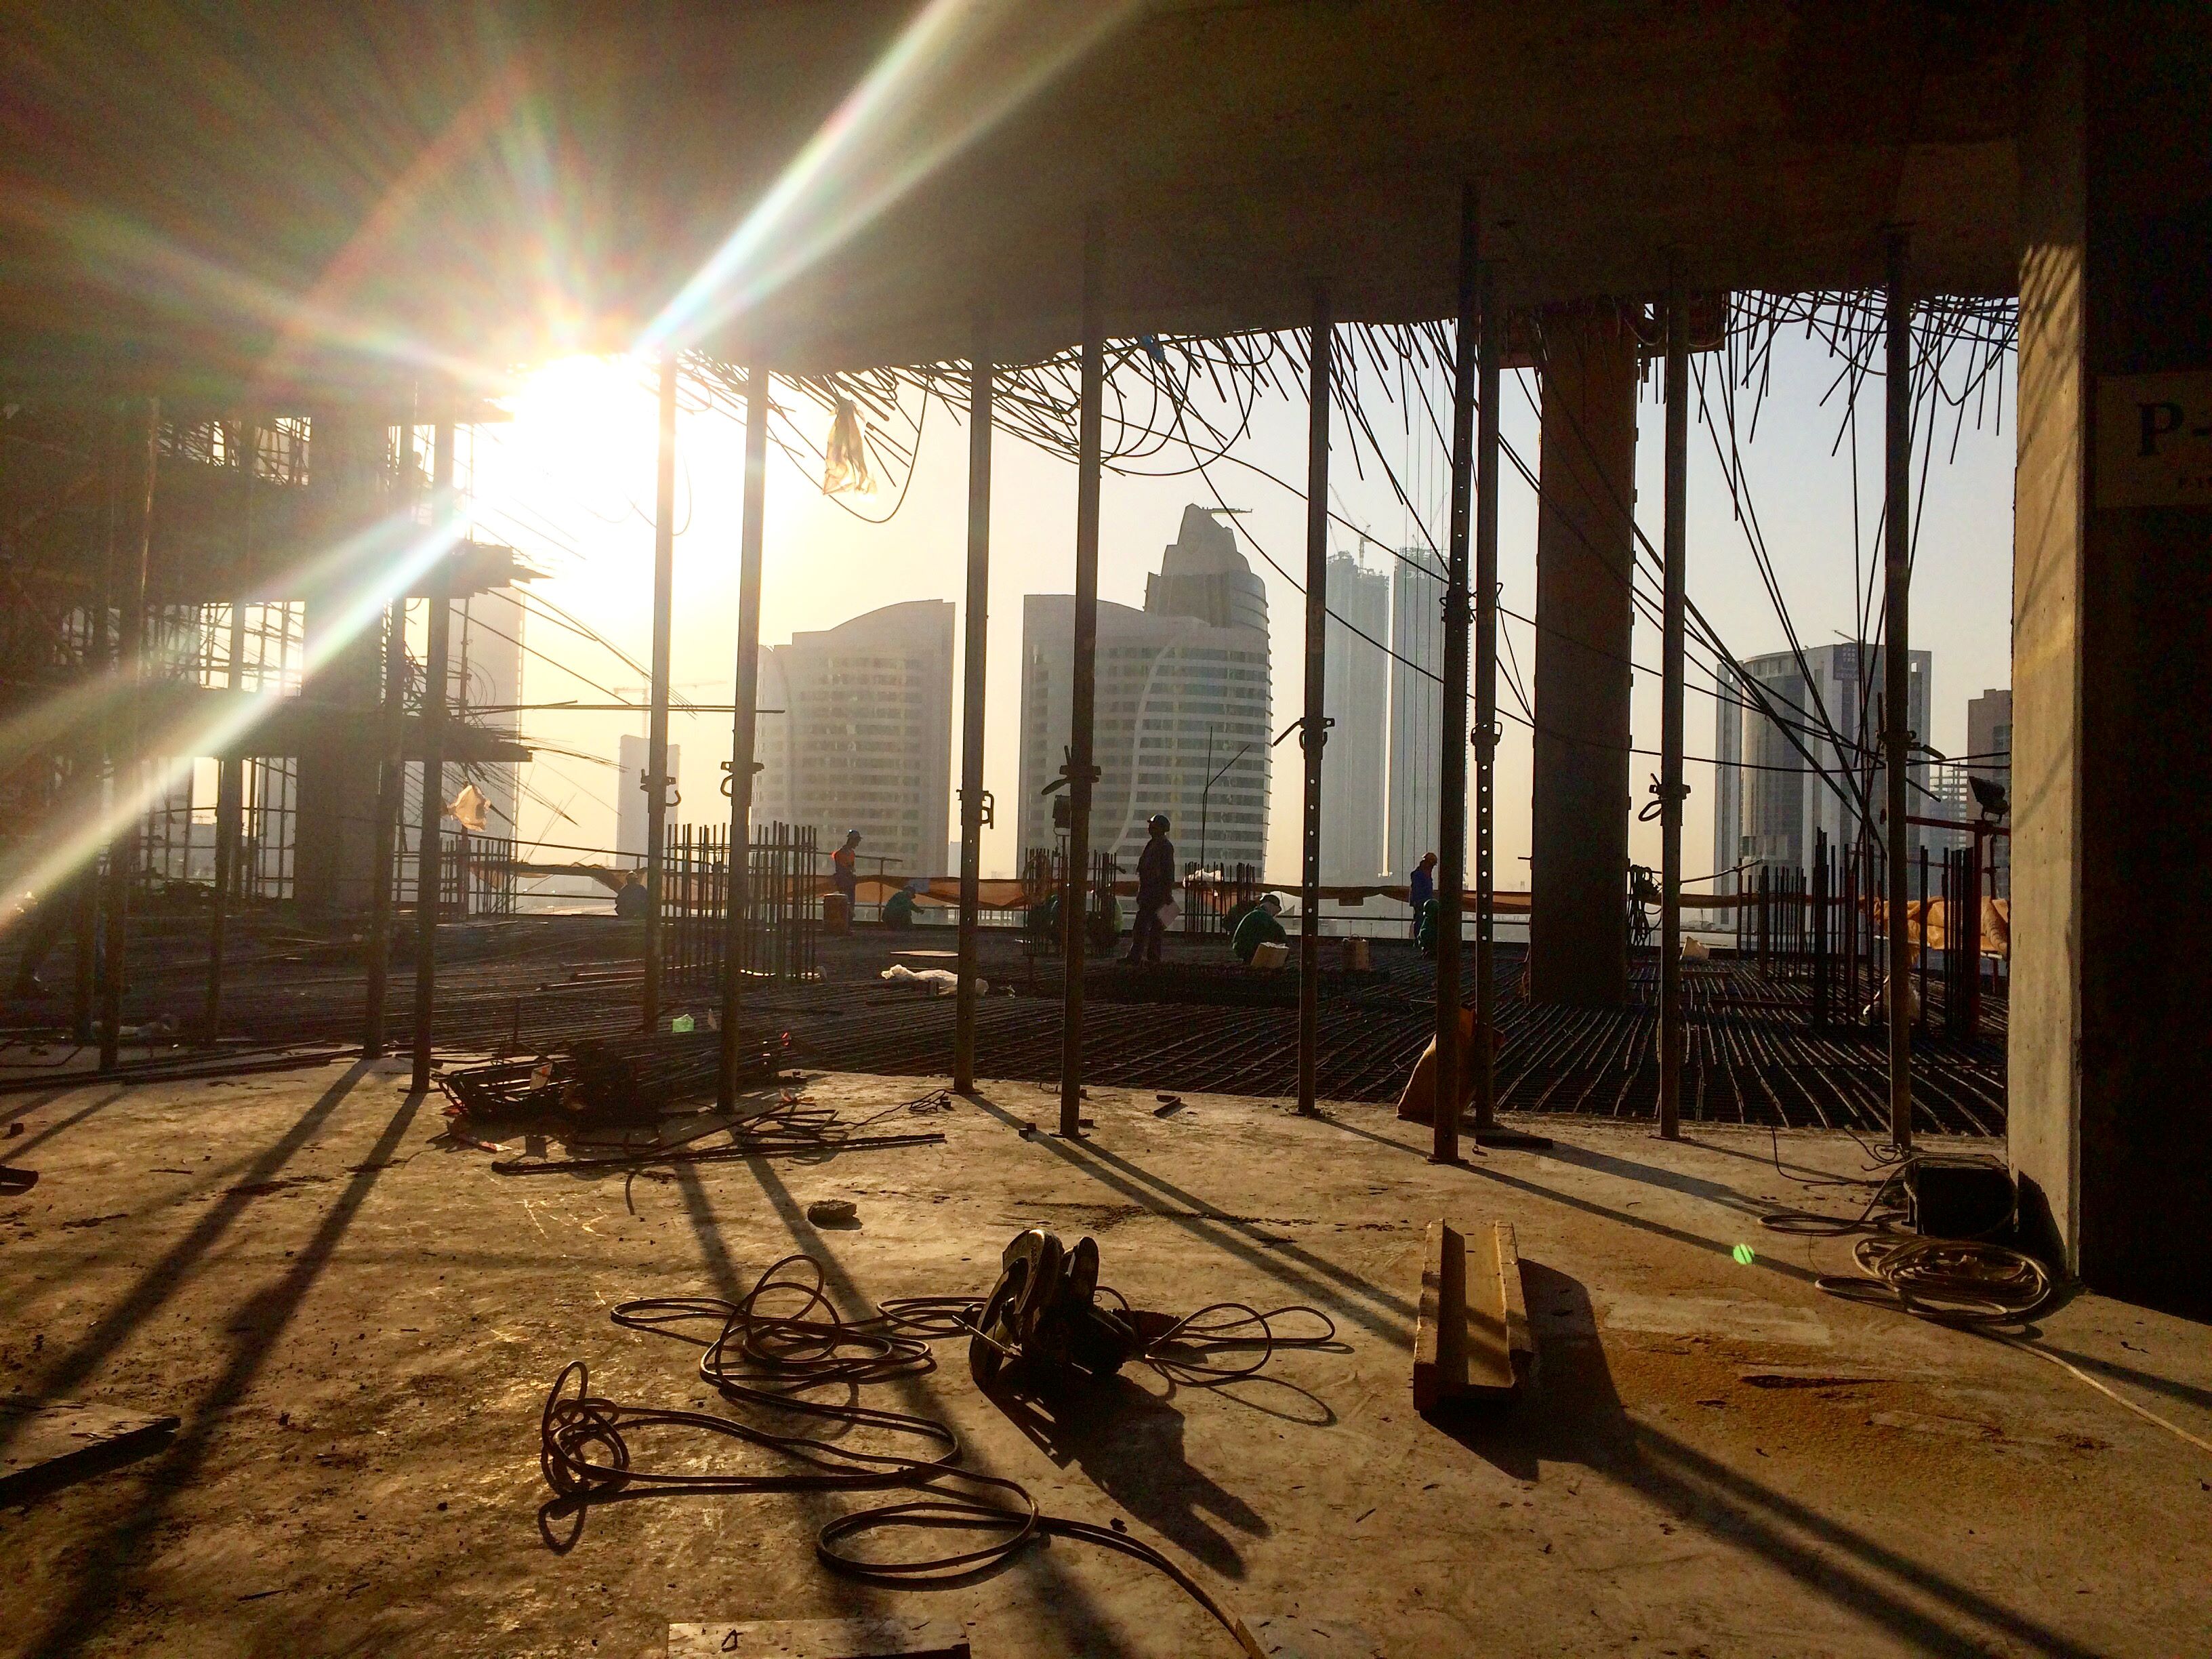 The early morning sunrise on the construction sites of Dubai sheds light on a world many don't realise exist, hidden beneath the luxury and glamour.